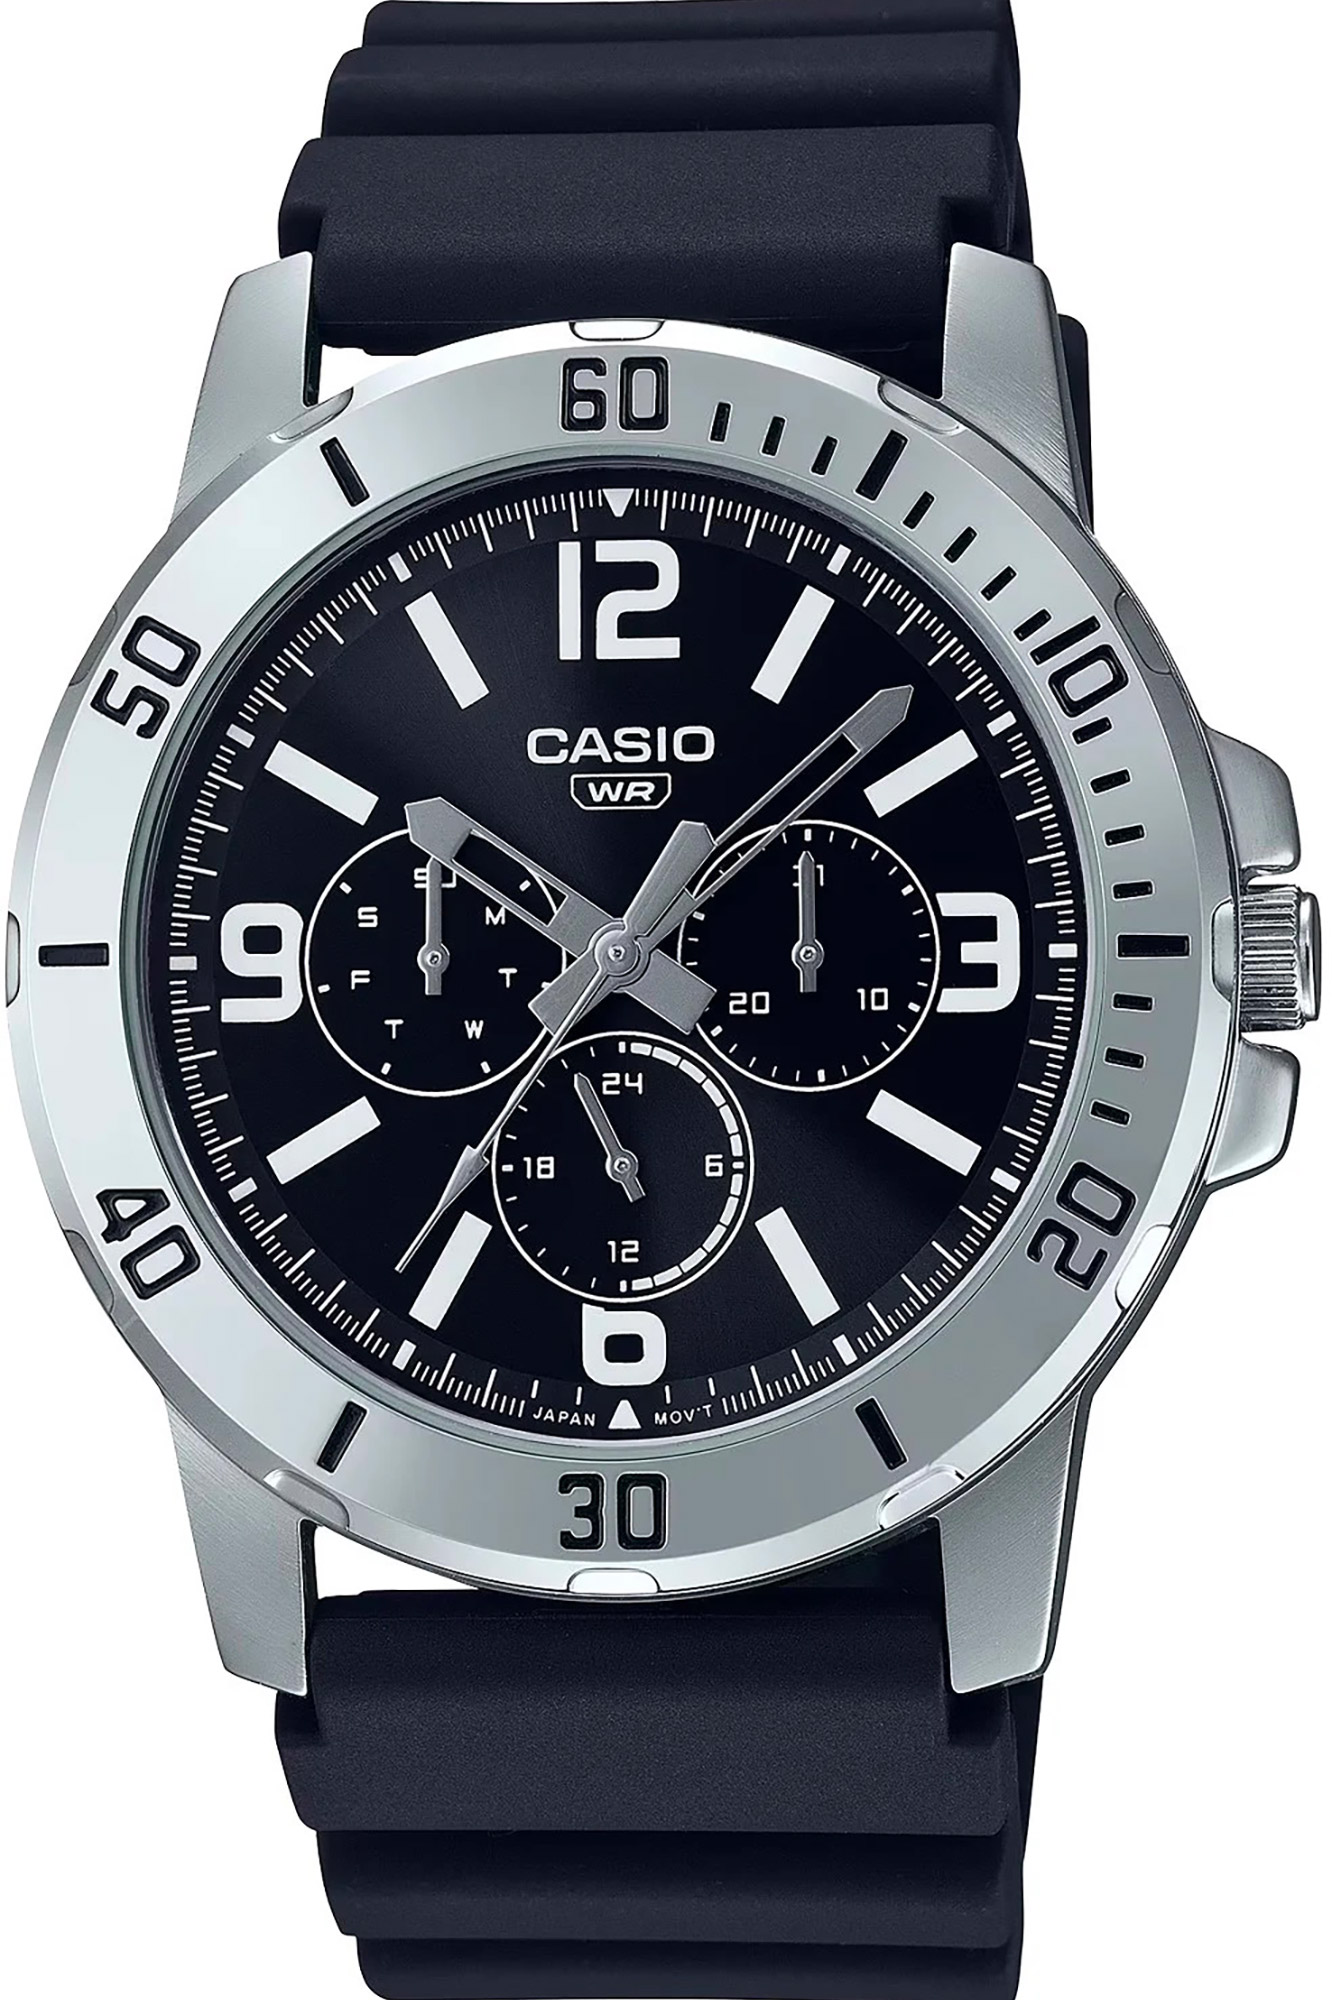 Watch CASIO Collection mtp-vd300-1b